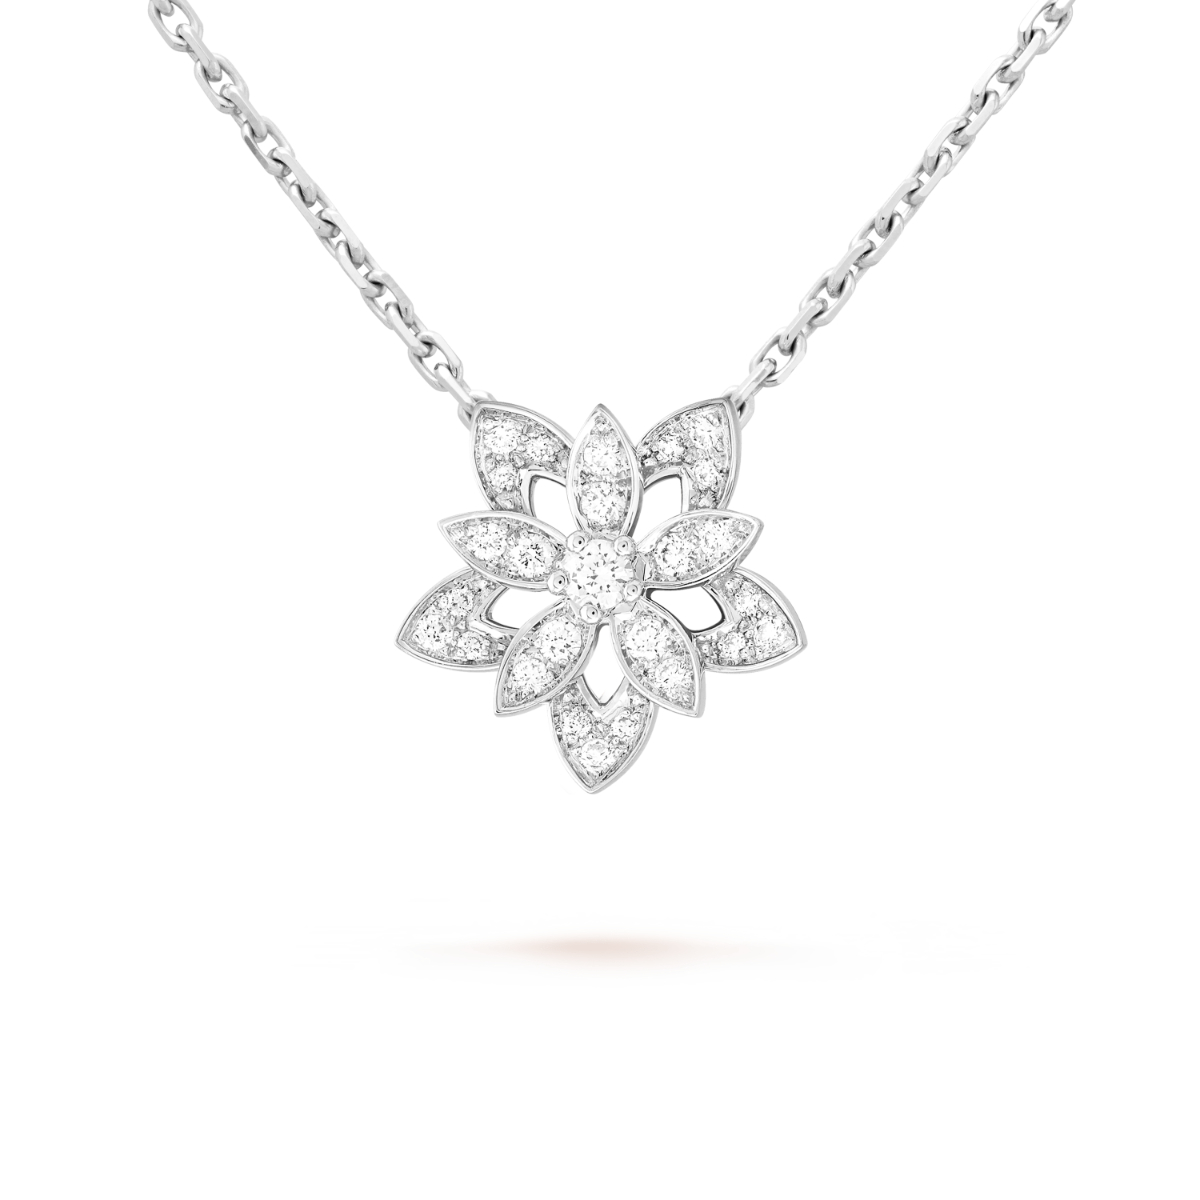 Van Cleef & Arpels Reveals New Diamond-set Creations As Part Of The Lotus Collection